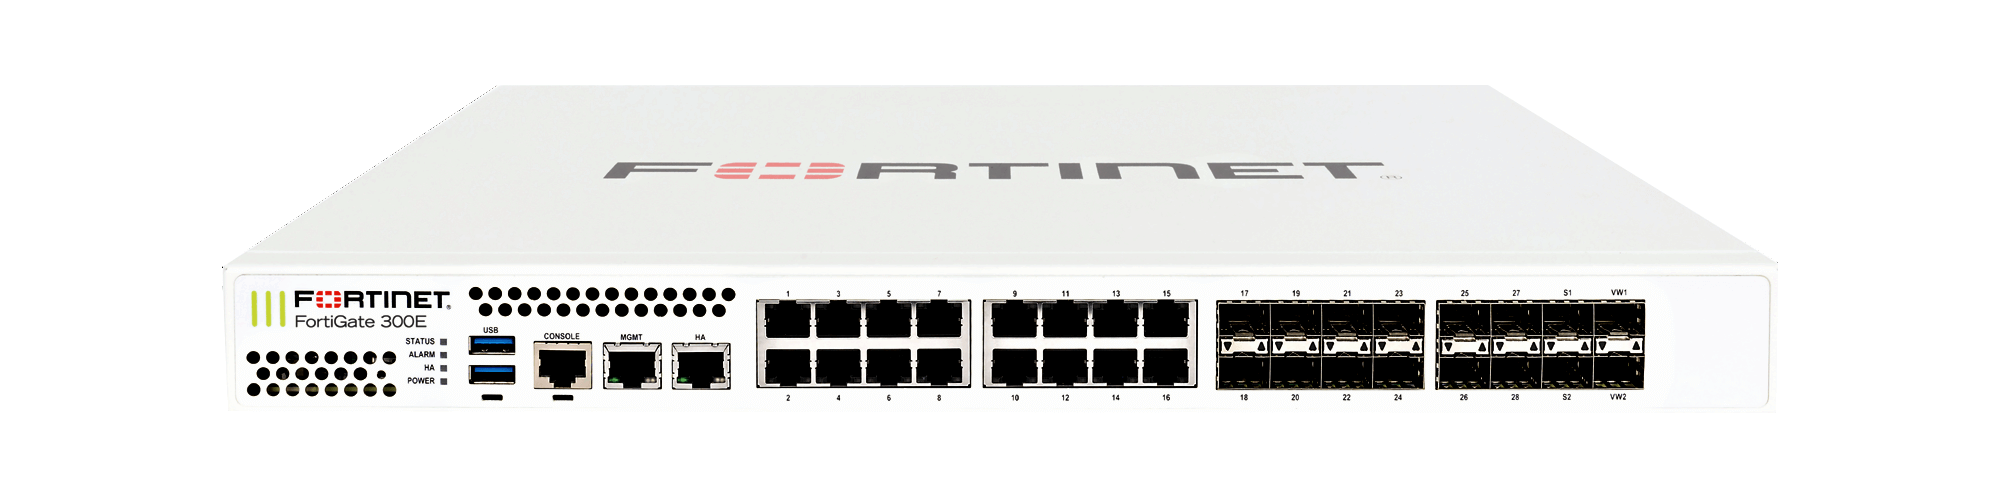 Fortinet FortiGate 300E Firewall (End of Sale/Life)